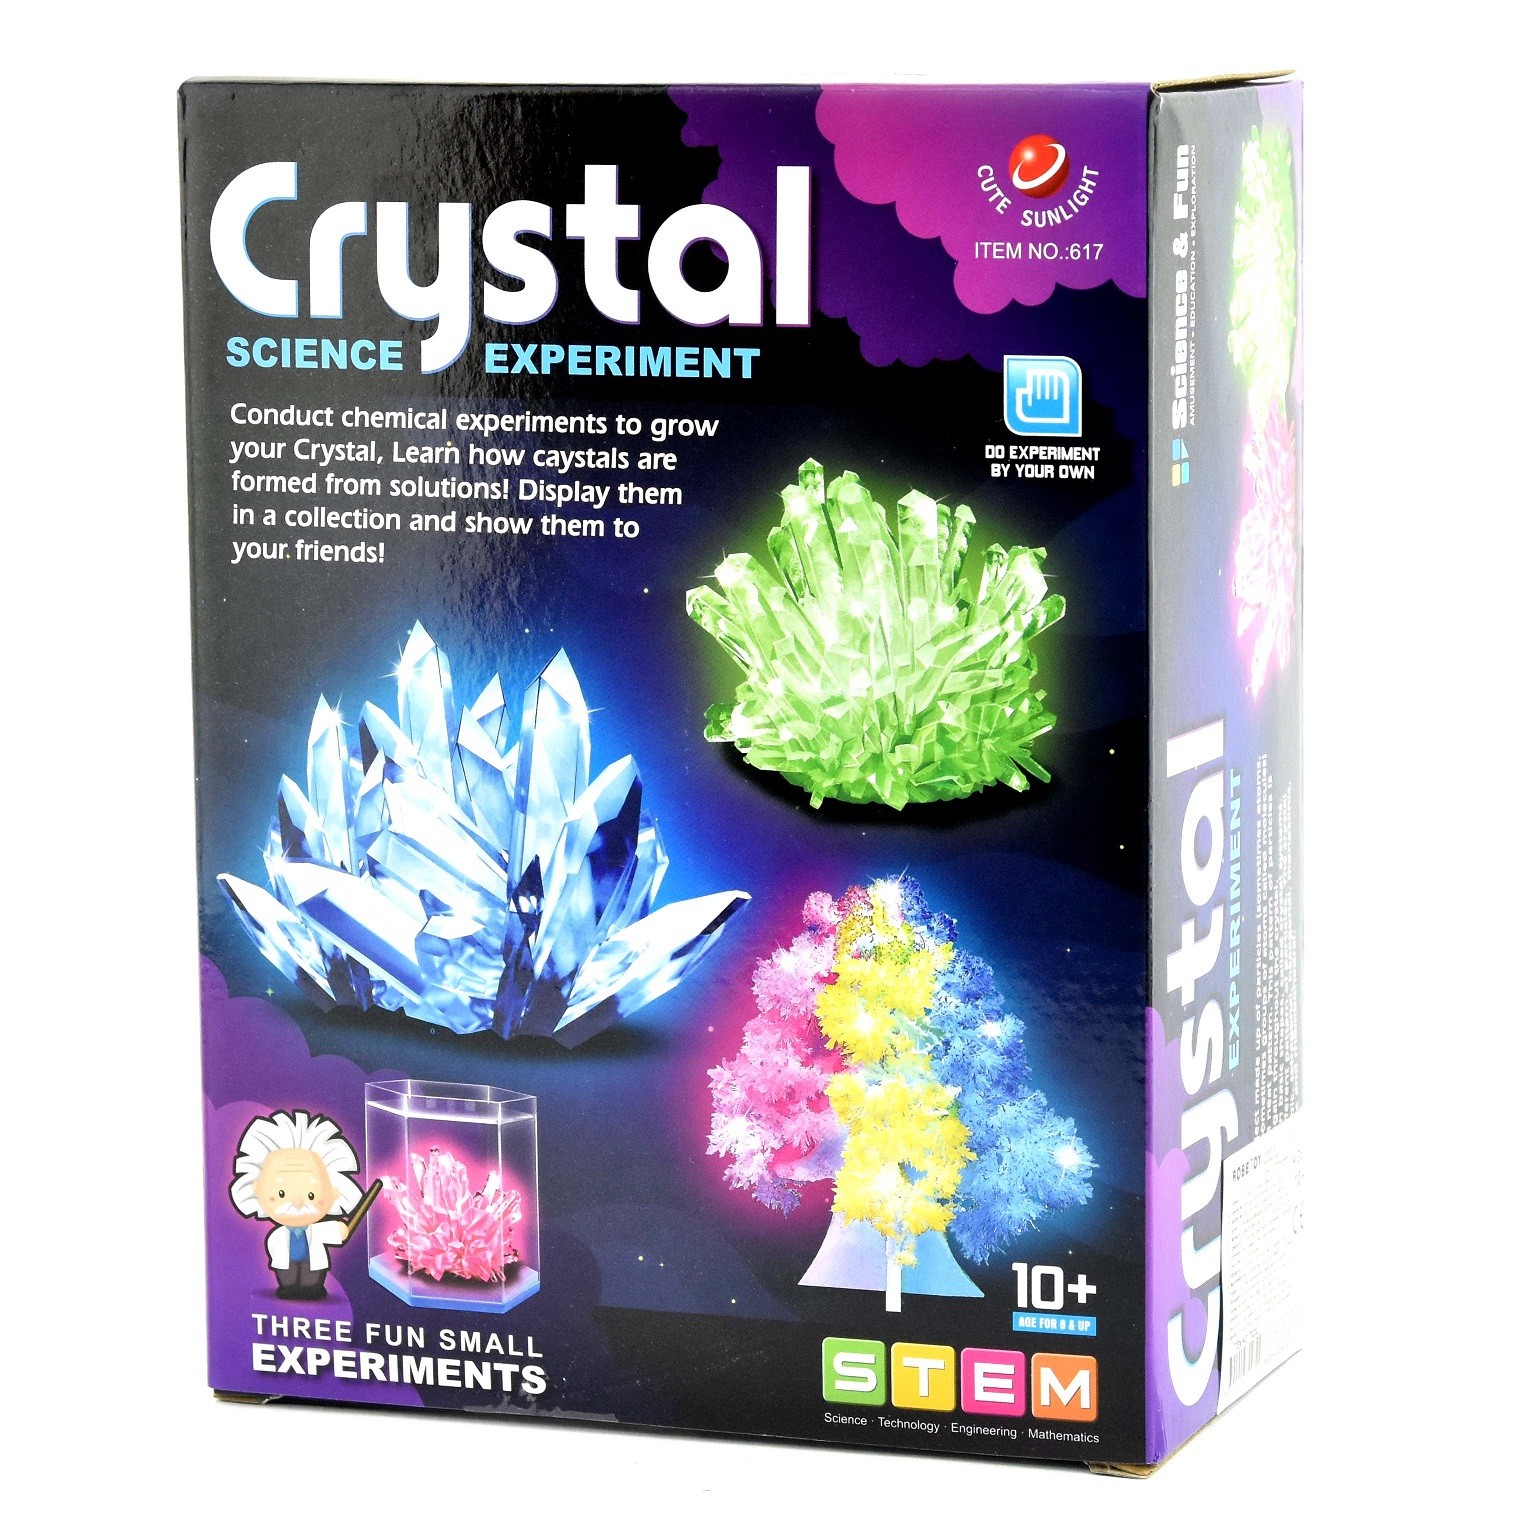 Crystal science experiment